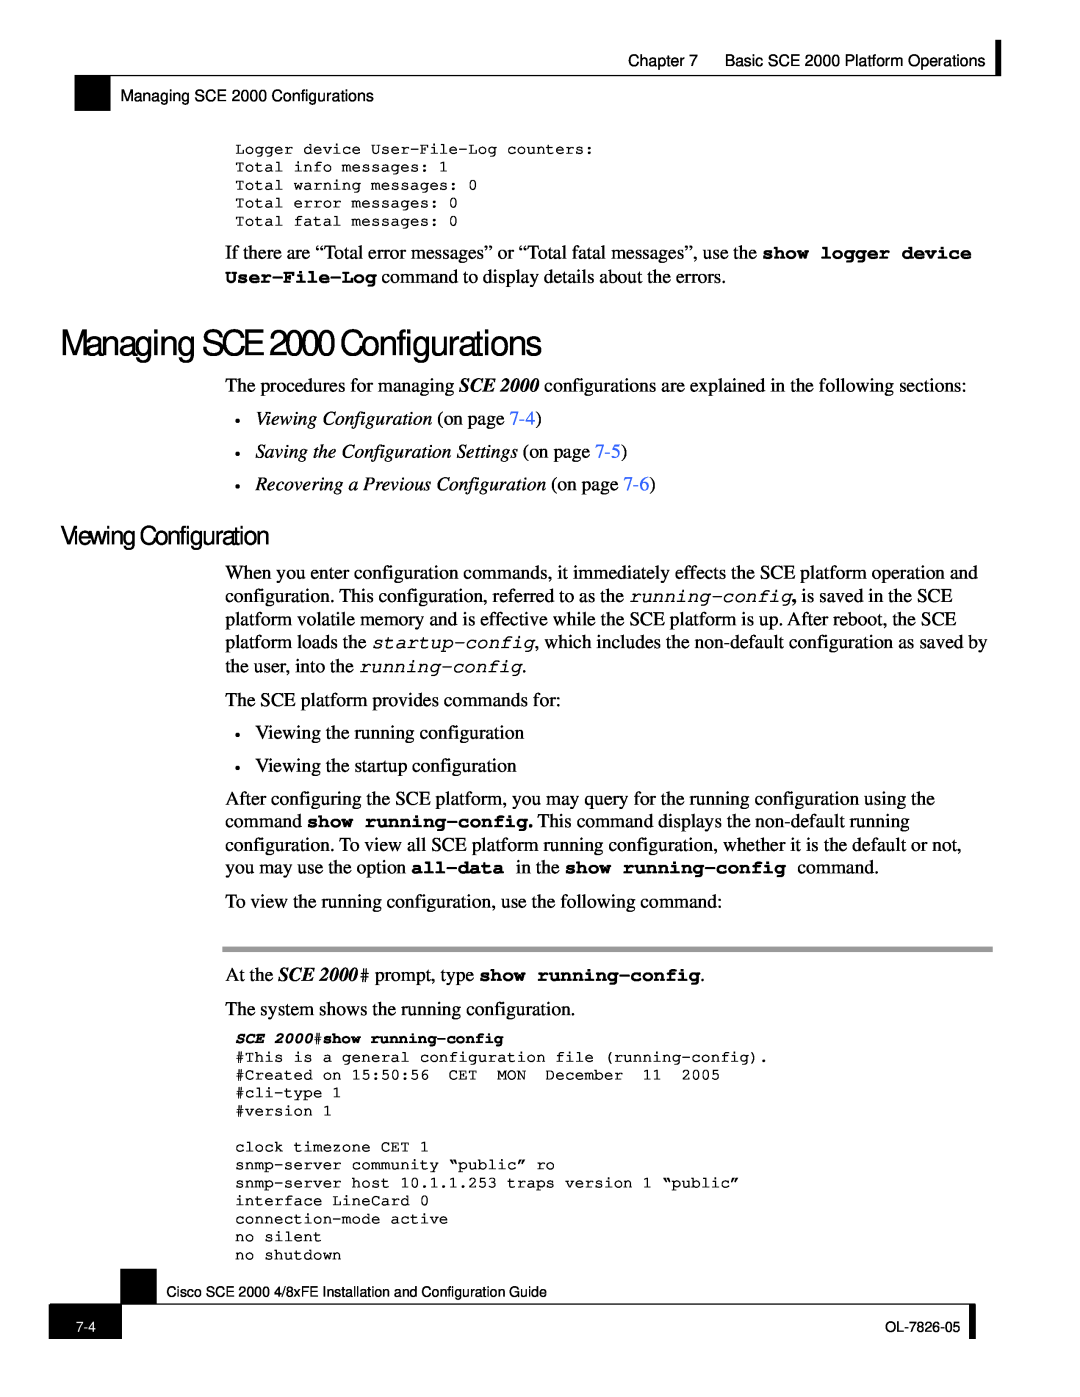 Cisco Systems SCE 2000 4/8xFE manual Managing SCE 2000 Configurations, Viewing Configuration on page 